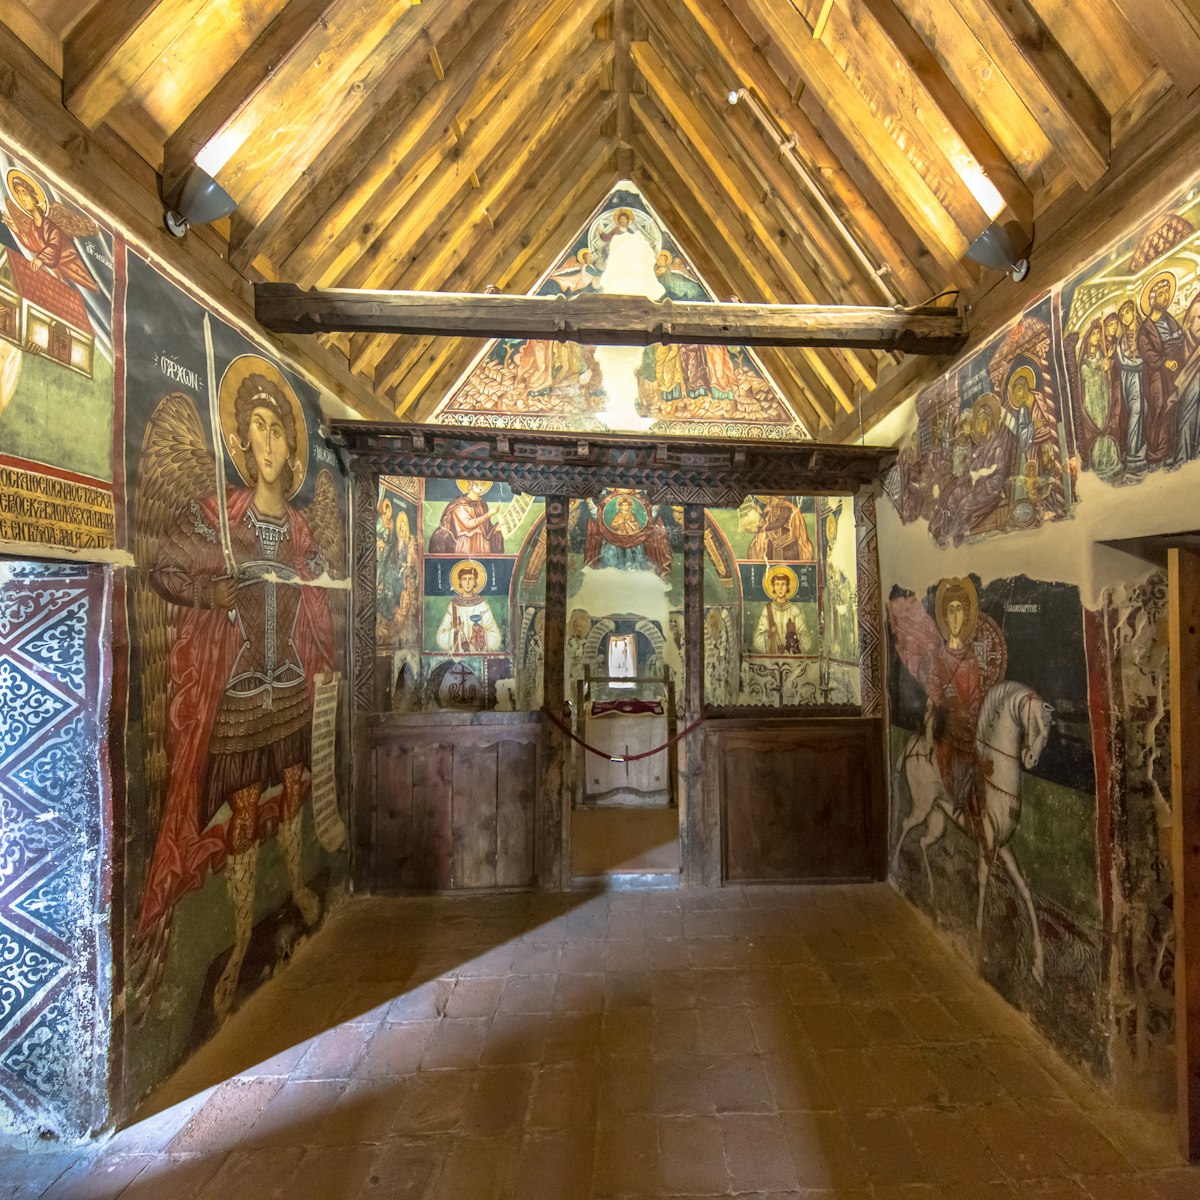 Interior of Church of Archangelos Michail or Archangel Michael in village of Pedoulas with Historic icon paintings.